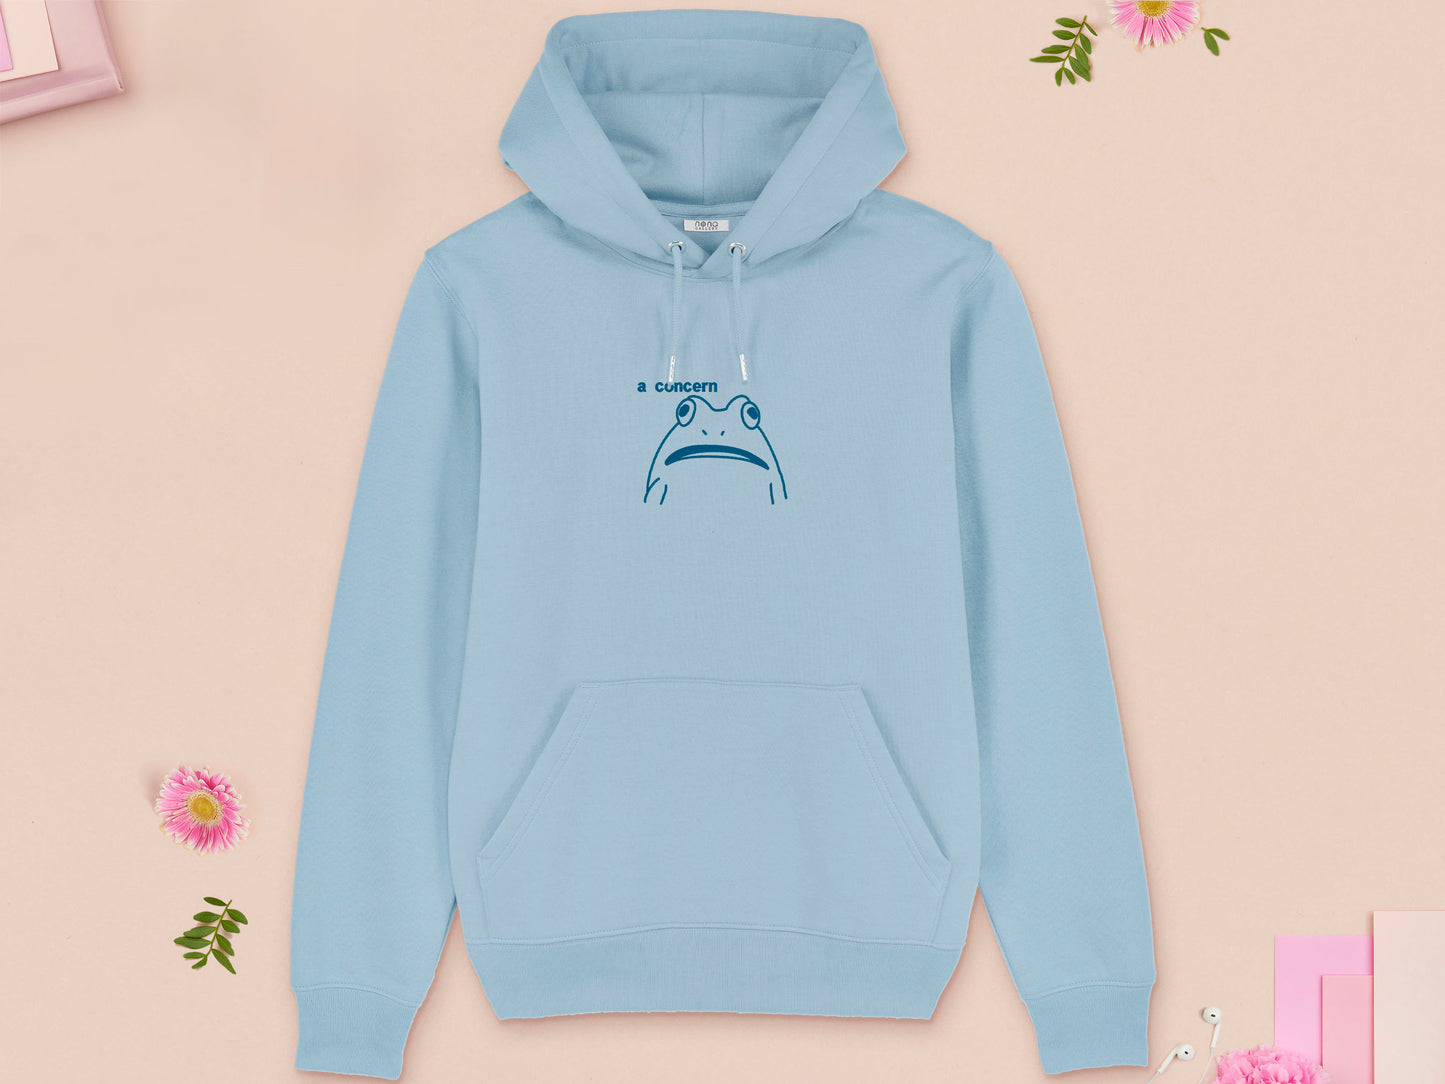 A blue long sleeve fleece hoodie, with an embroidered blue thread design of cute confused looking frog with the text a concern.